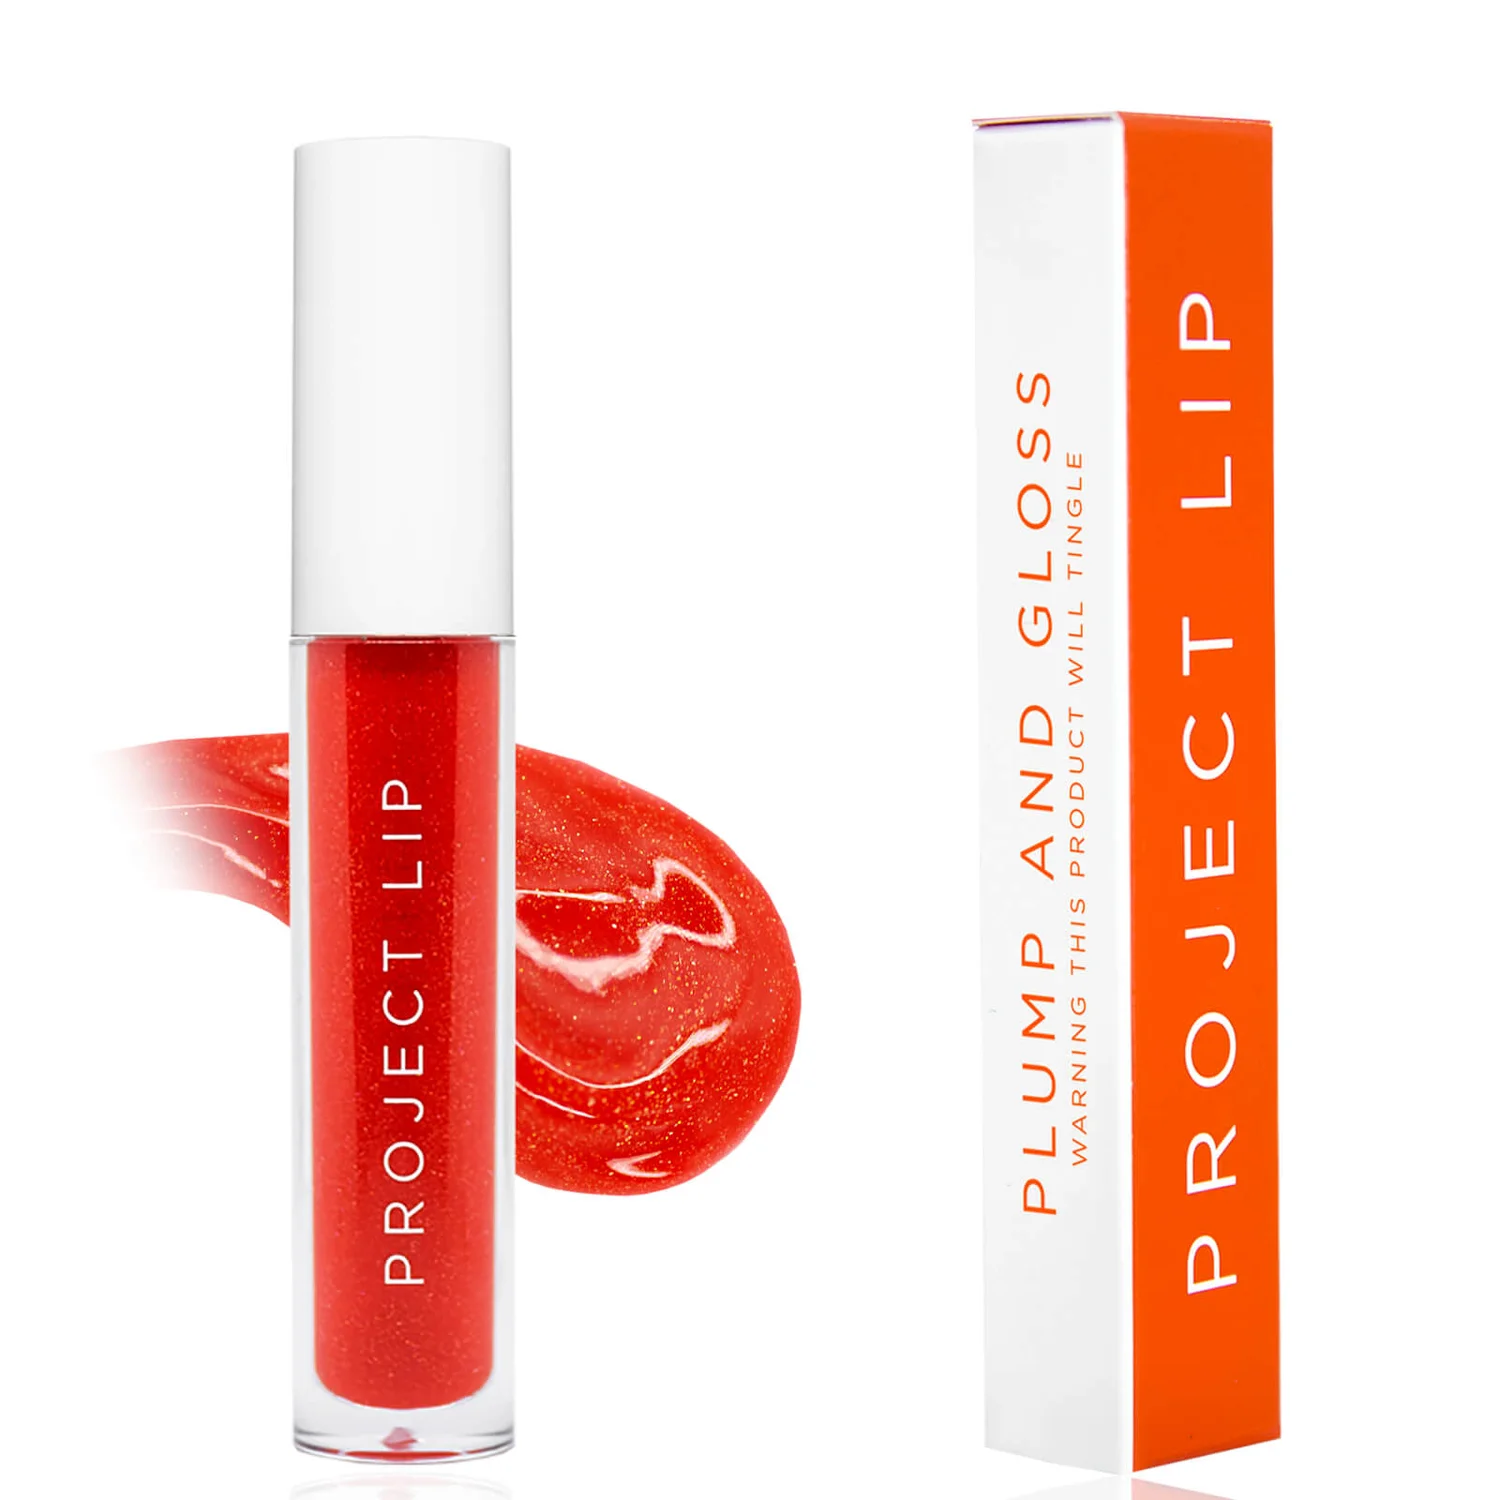 Project Lips gloss in flame a plumping lip gloss in a bright orange red